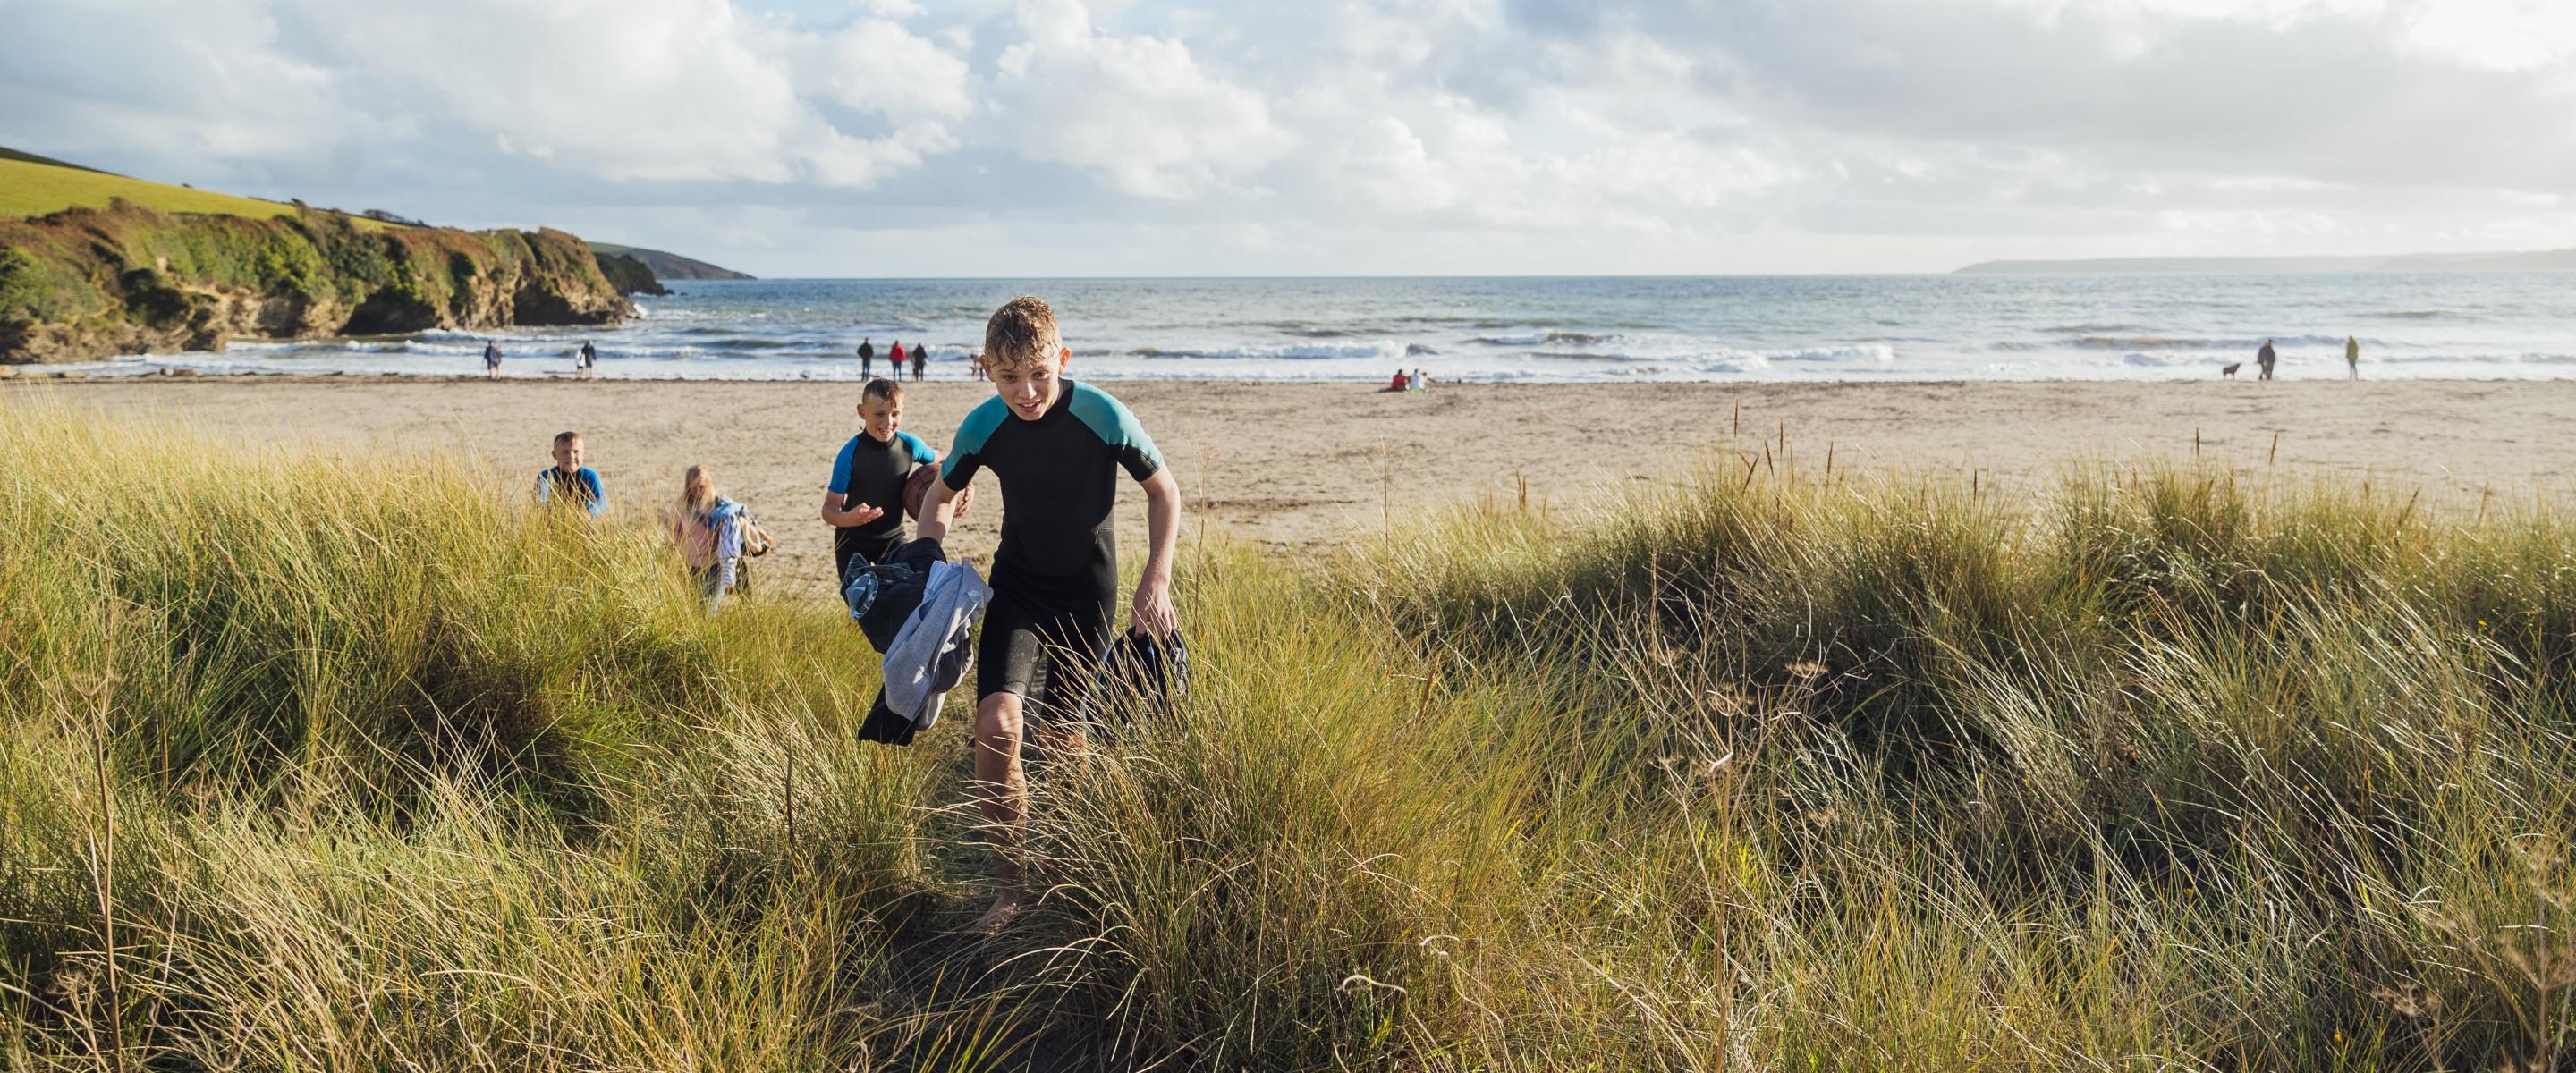 Photo of two young boys running off a beach